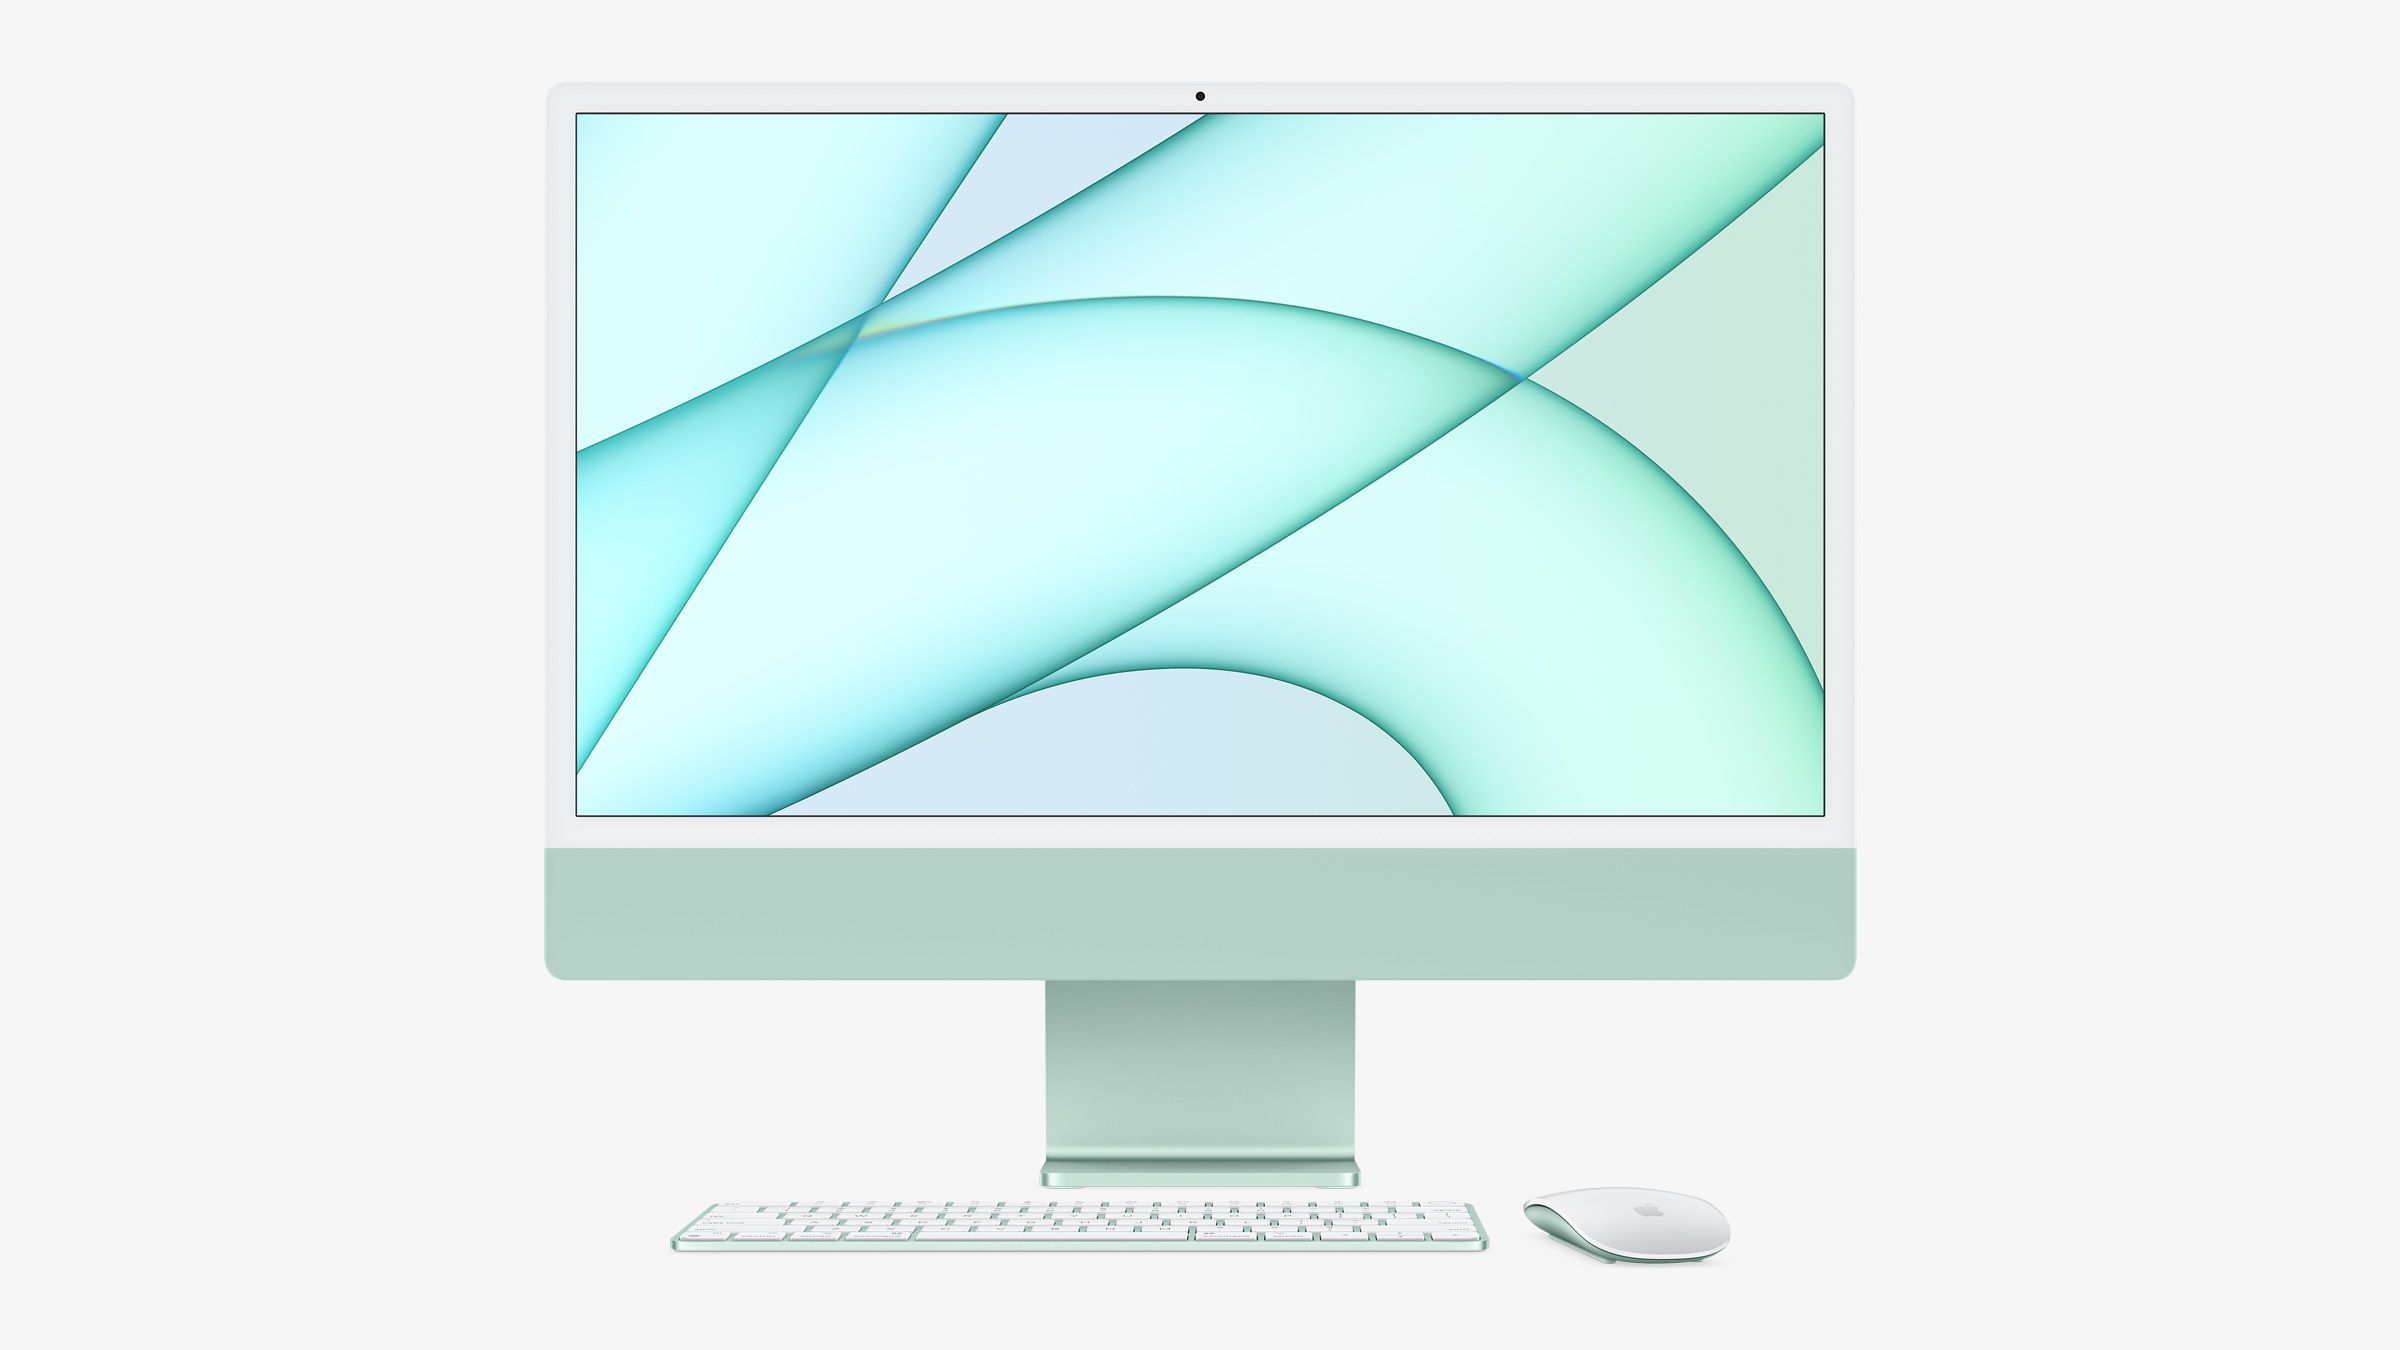 Green M1 iMac with mouse and keyboard